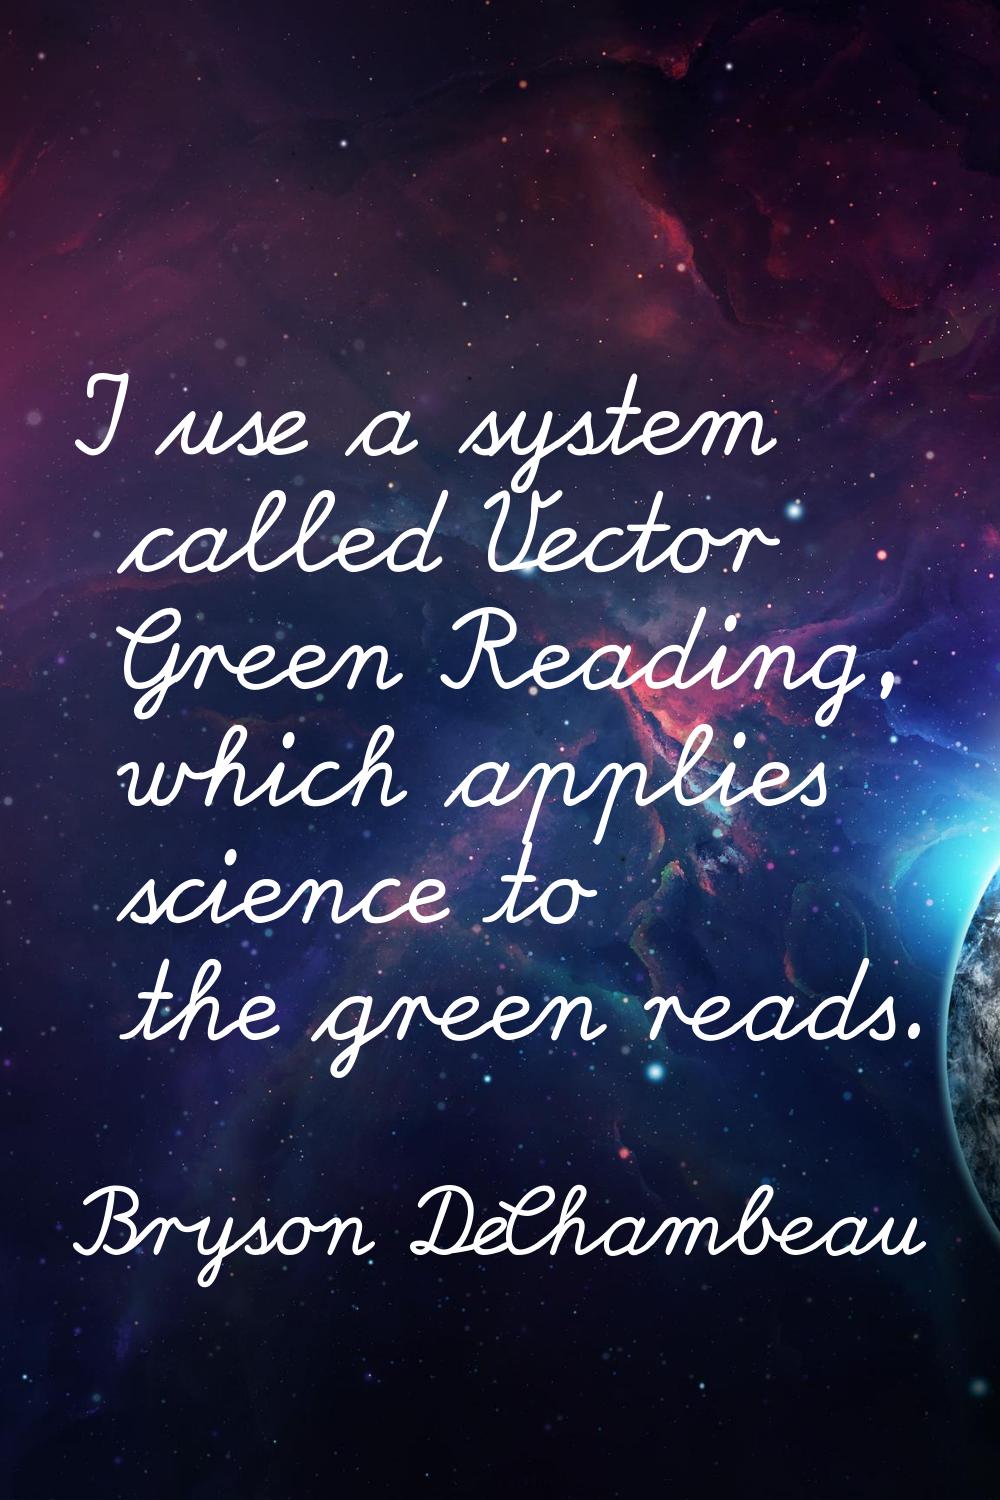 I use a system called Vector Green Reading, which applies science to the green reads.